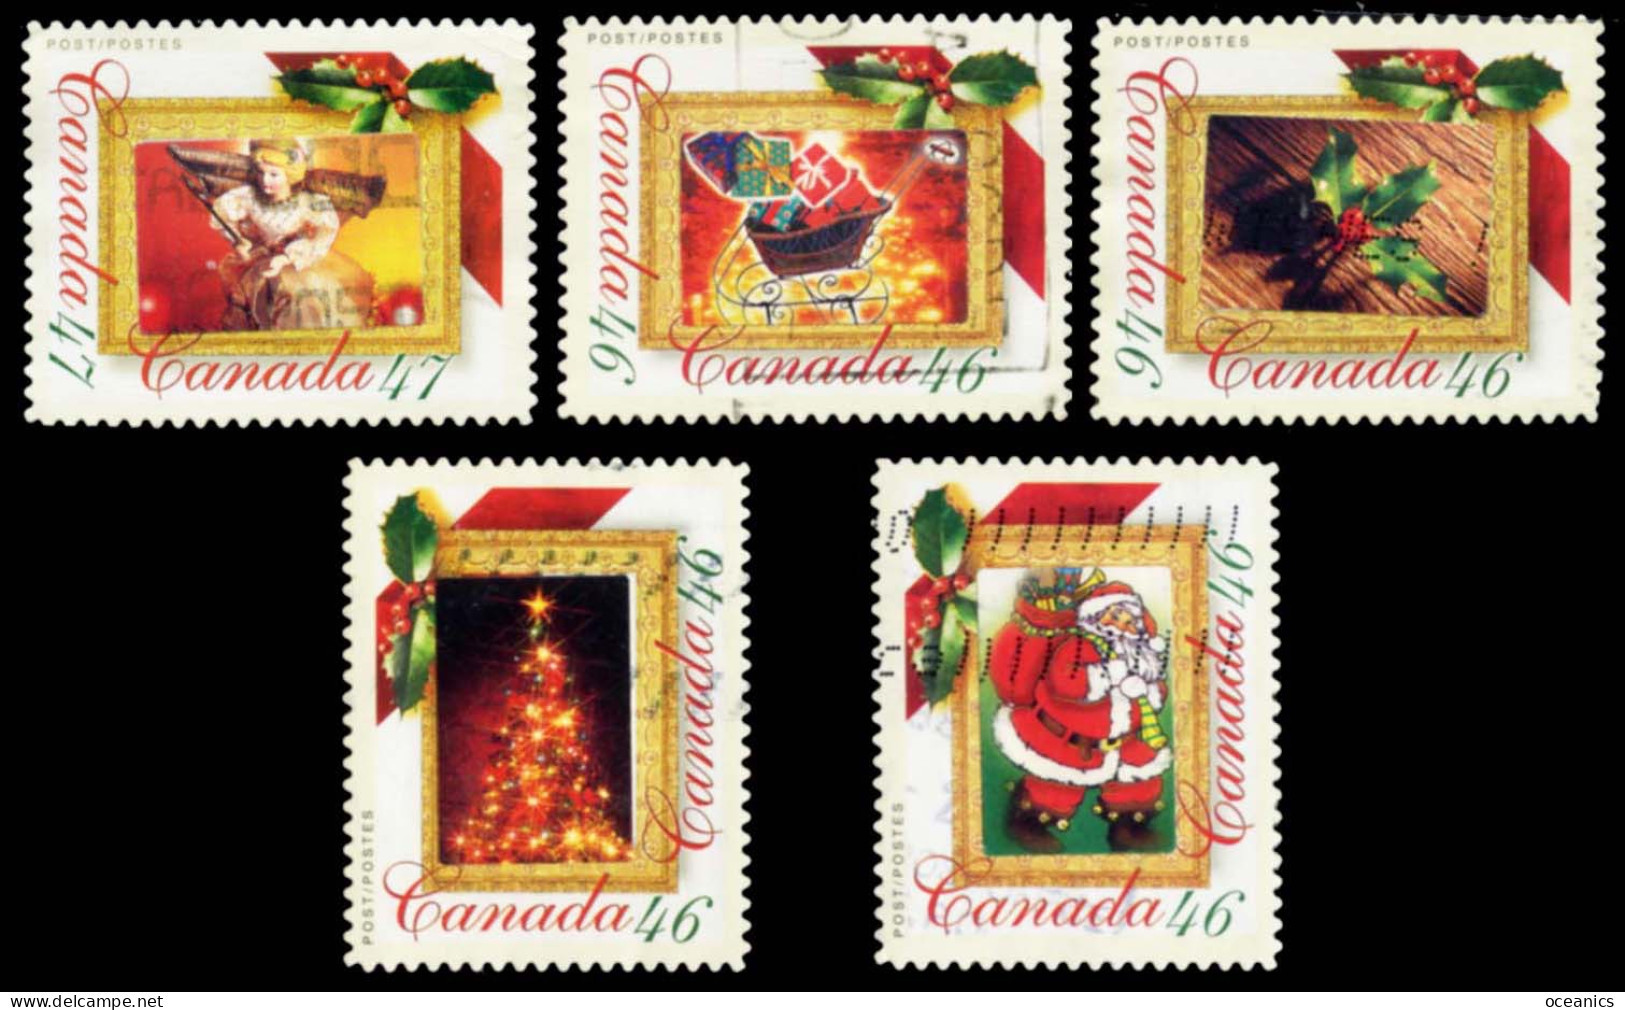 Canada (Scott No.1872 - Timbre Photo / Christmas / Picture Postage) (o) 5 DIFF. - Used Stamps